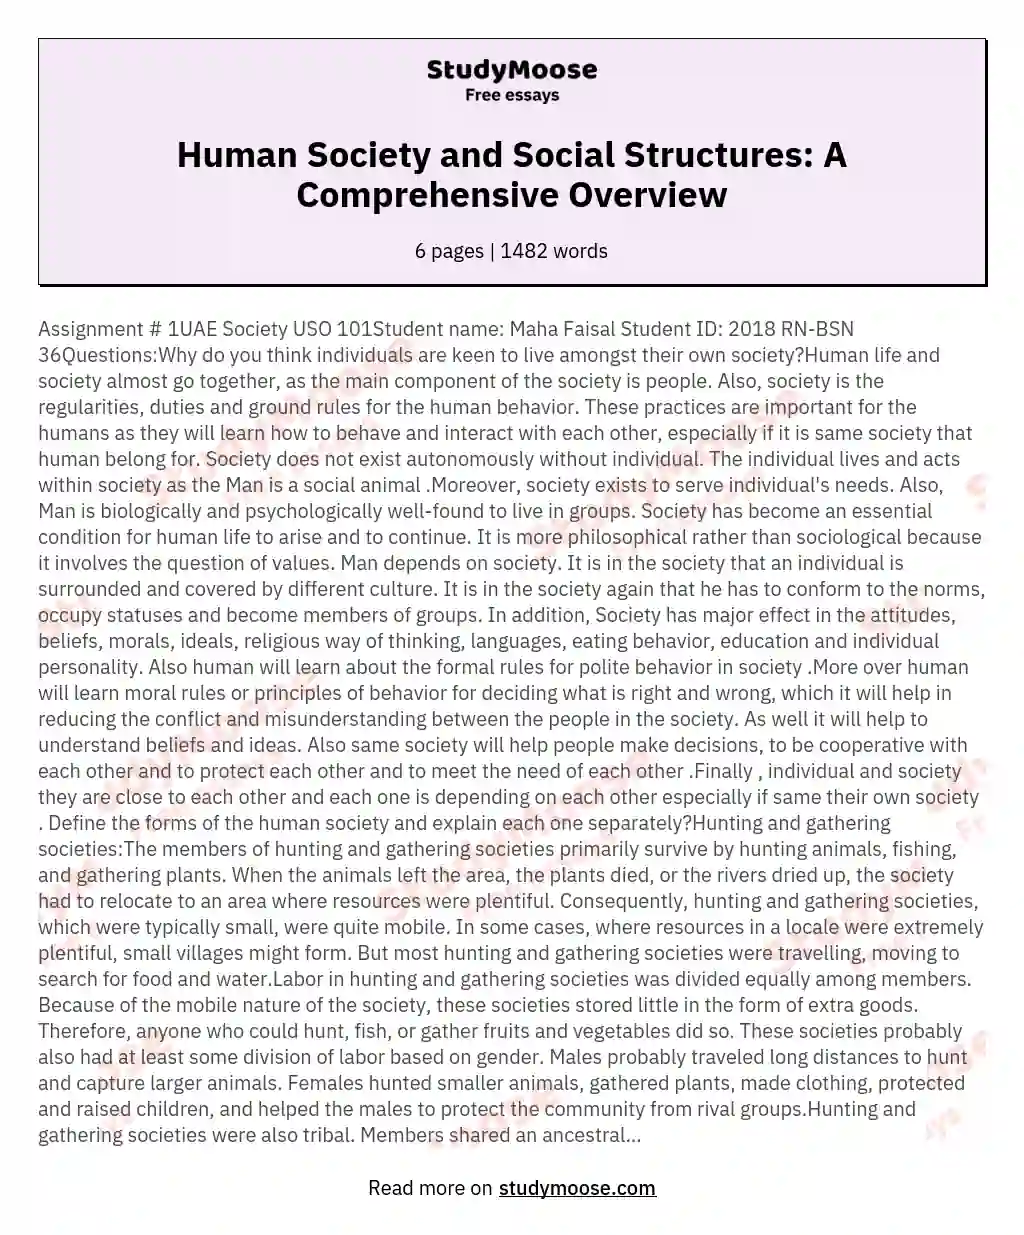 Human Society and Social Structures: A Comprehensive Overview essay